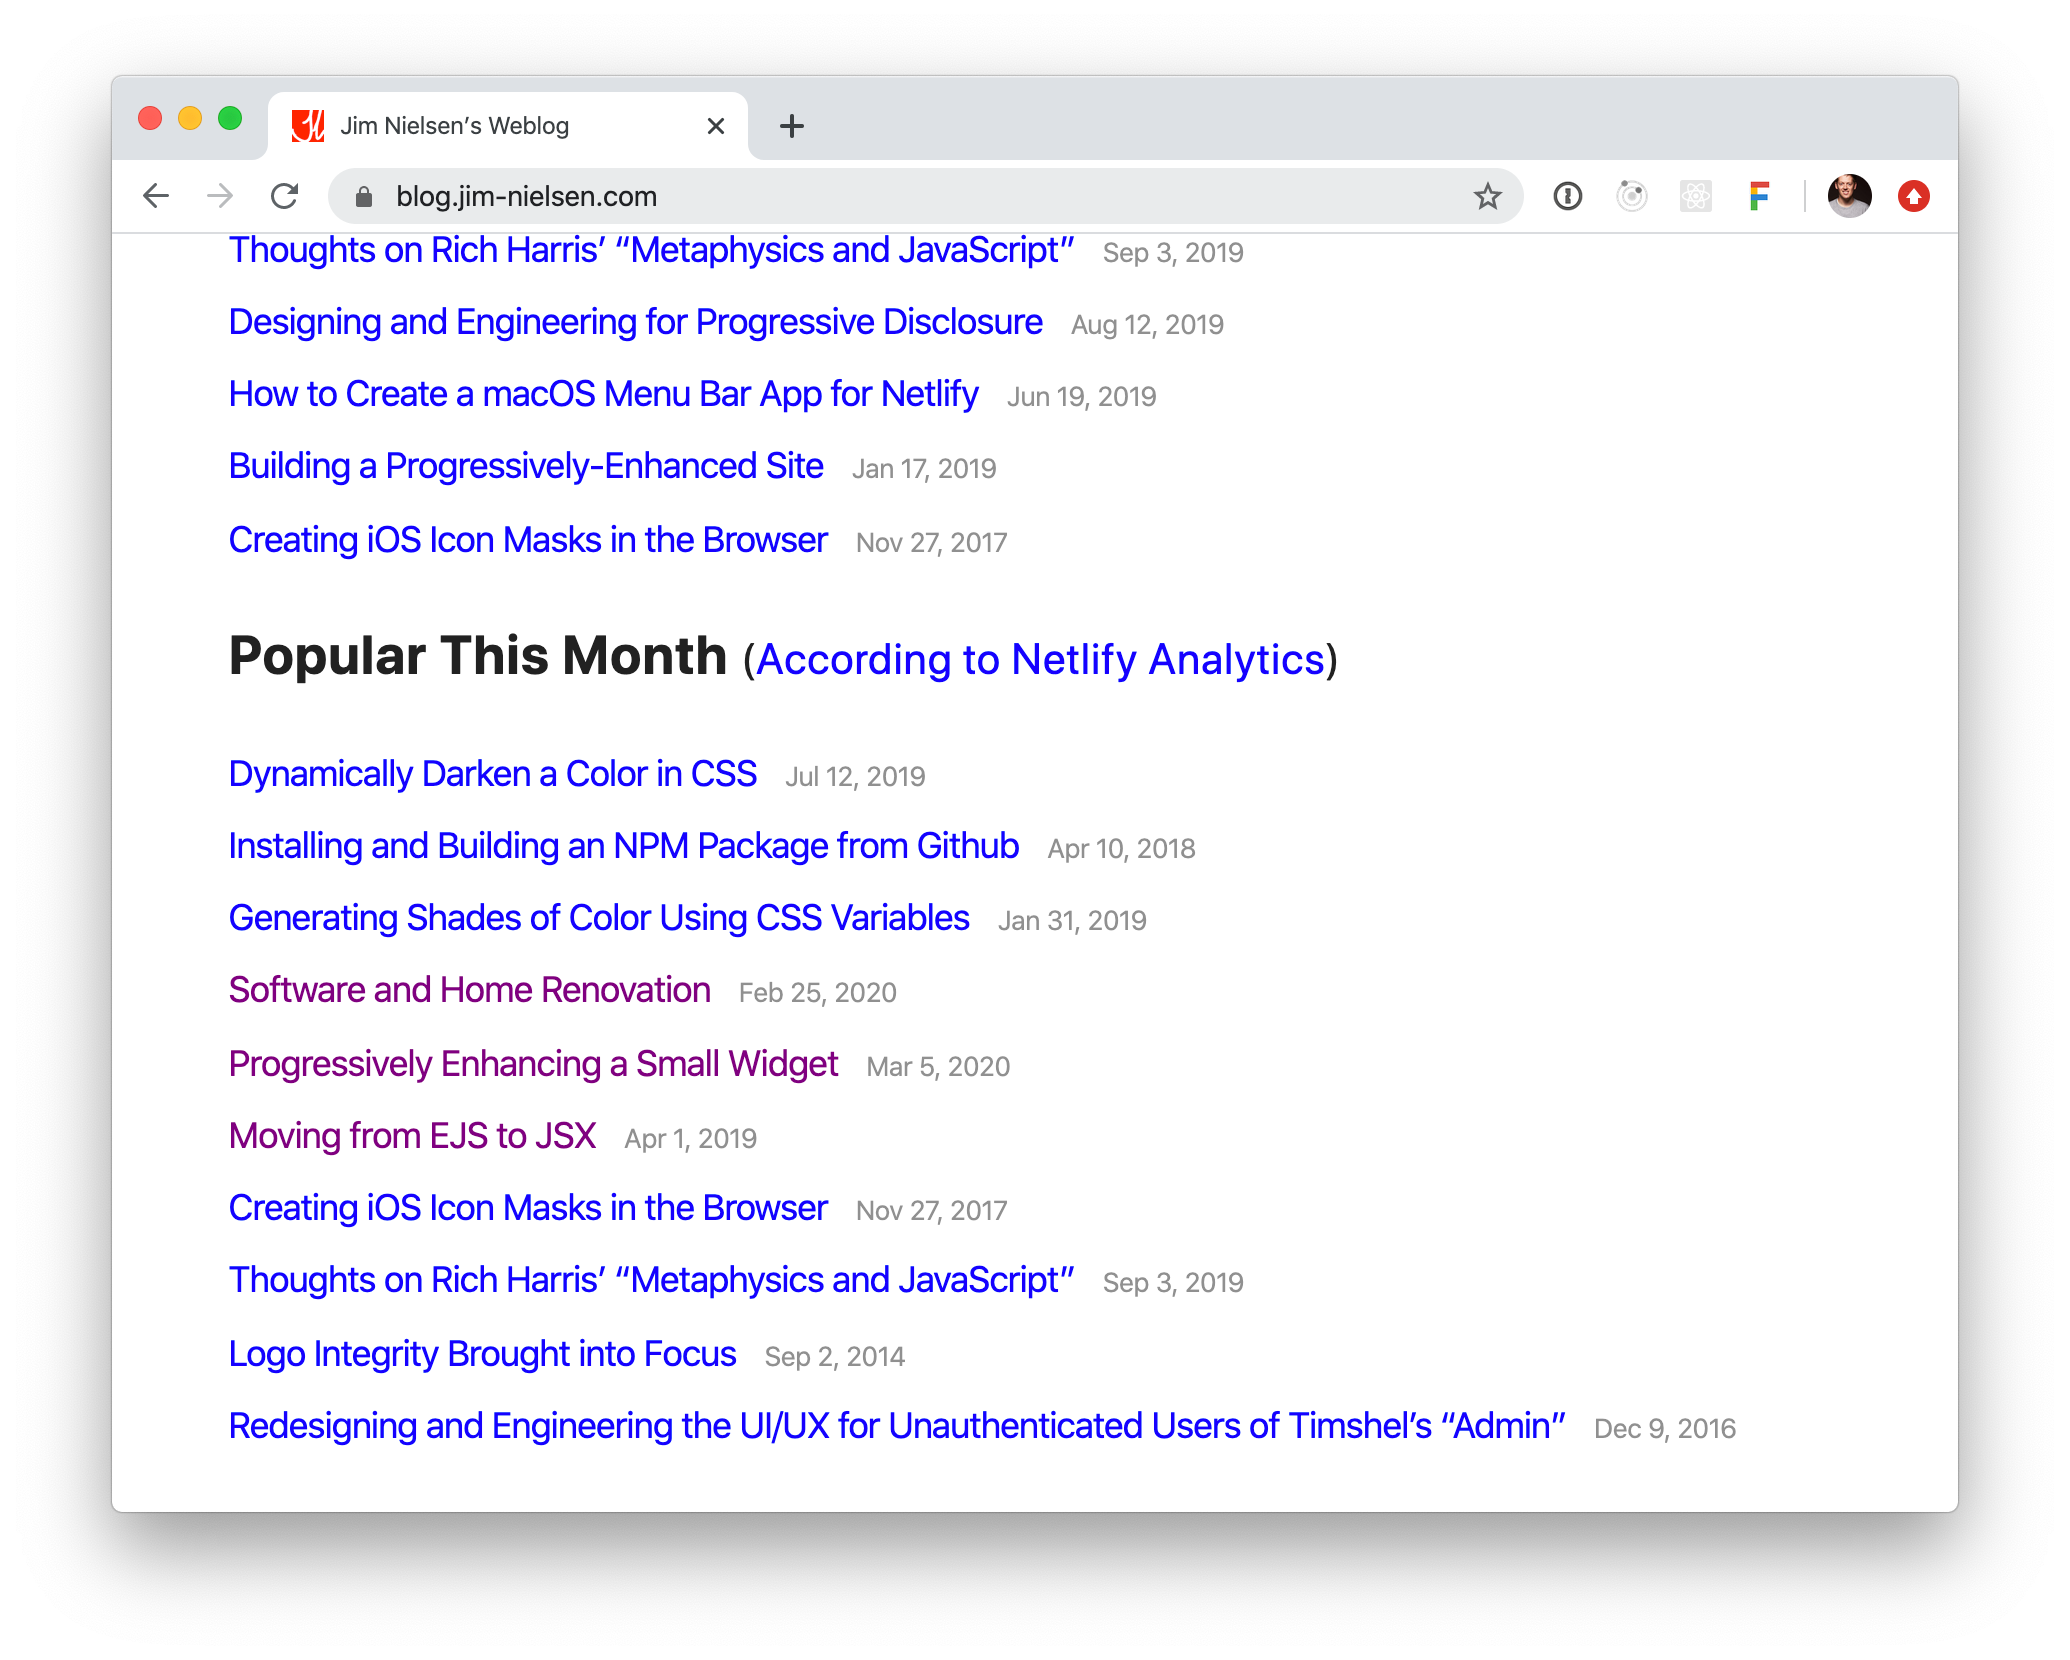 Screenshot of my blog’s “Popular This Month” list of posts powered by Netlify Analytics